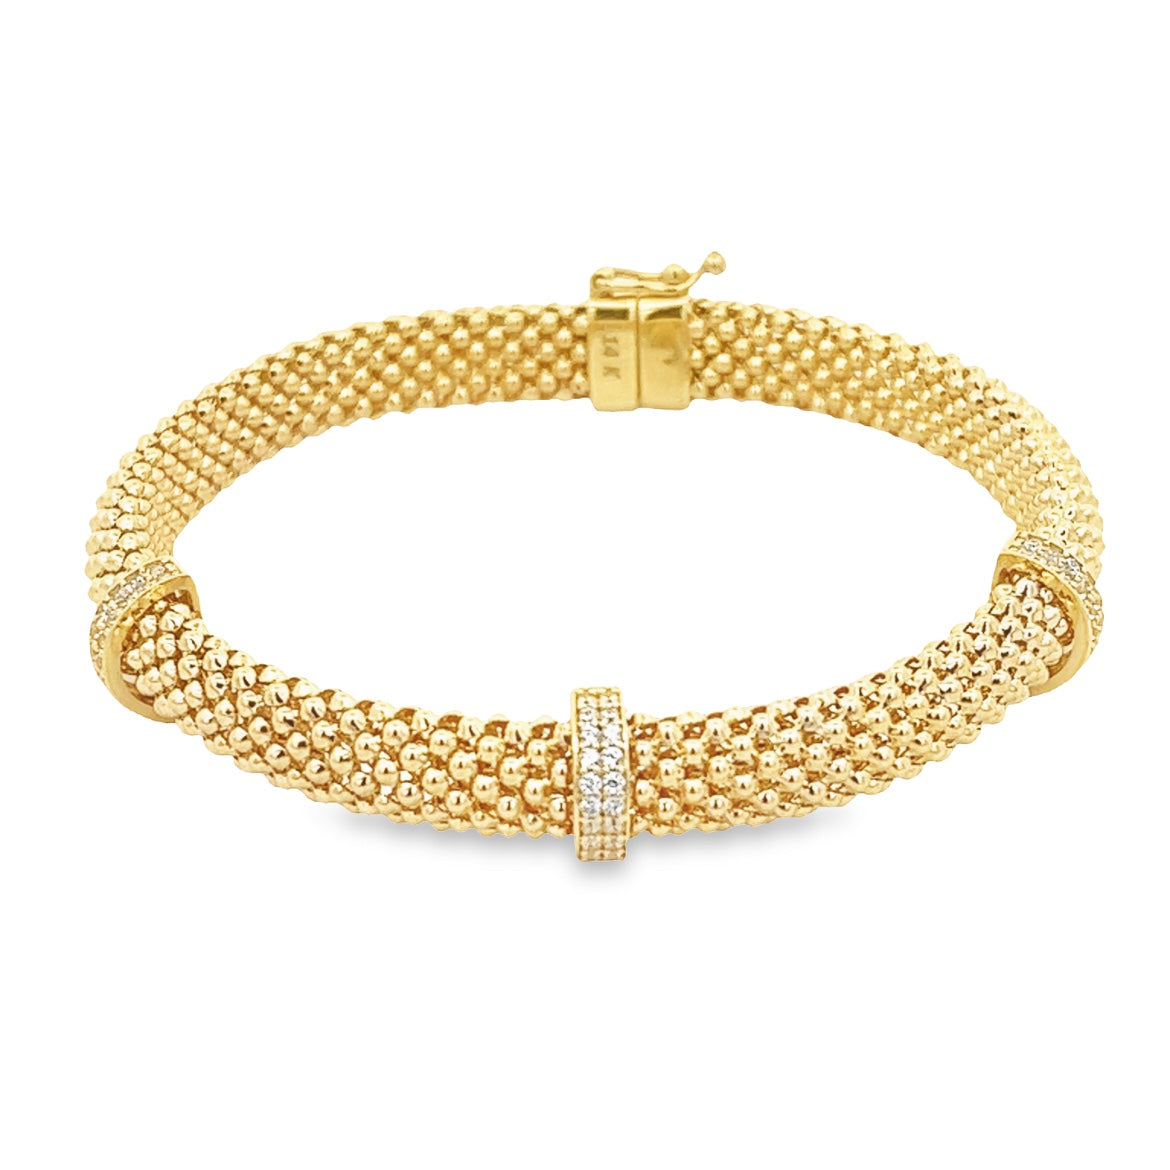 14K GOLD MESH BRACELET WITH PAVE CHARMS